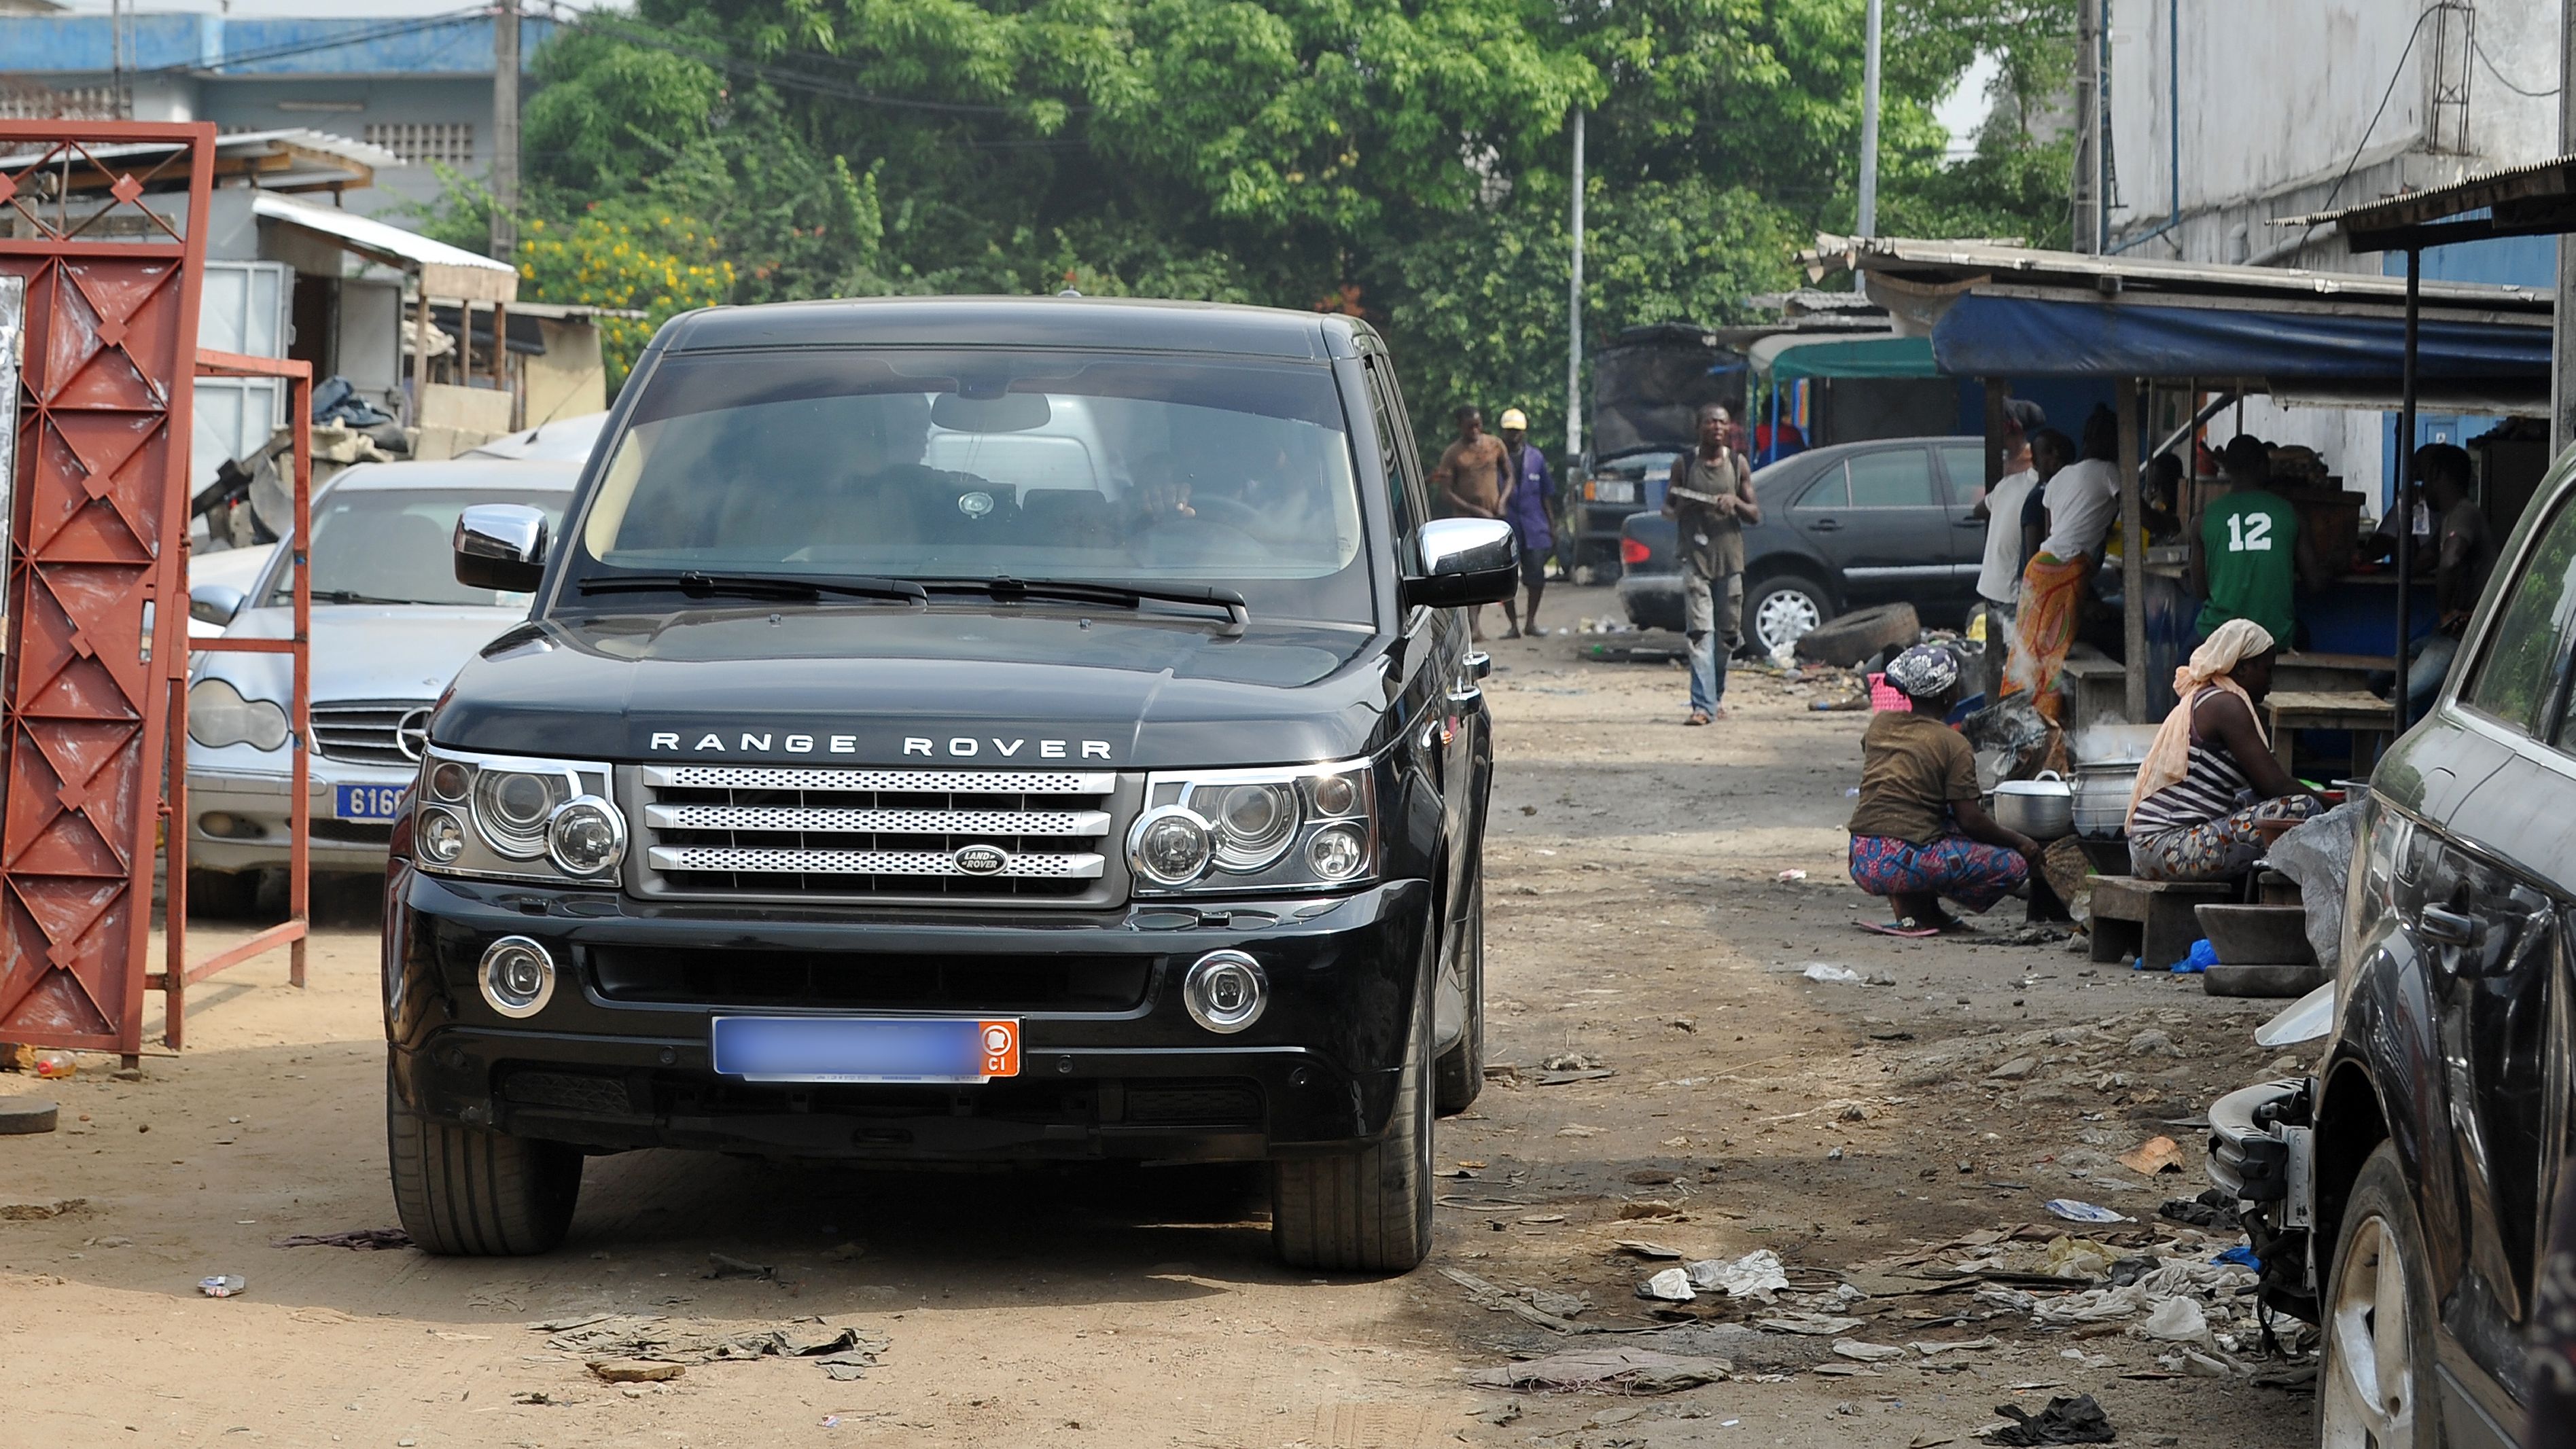 Range Rovers and other luxury cars are no strange sight in the streets of Abidjan, capital of Ivory Coast. Around 20% of the city's residents live in slums. 